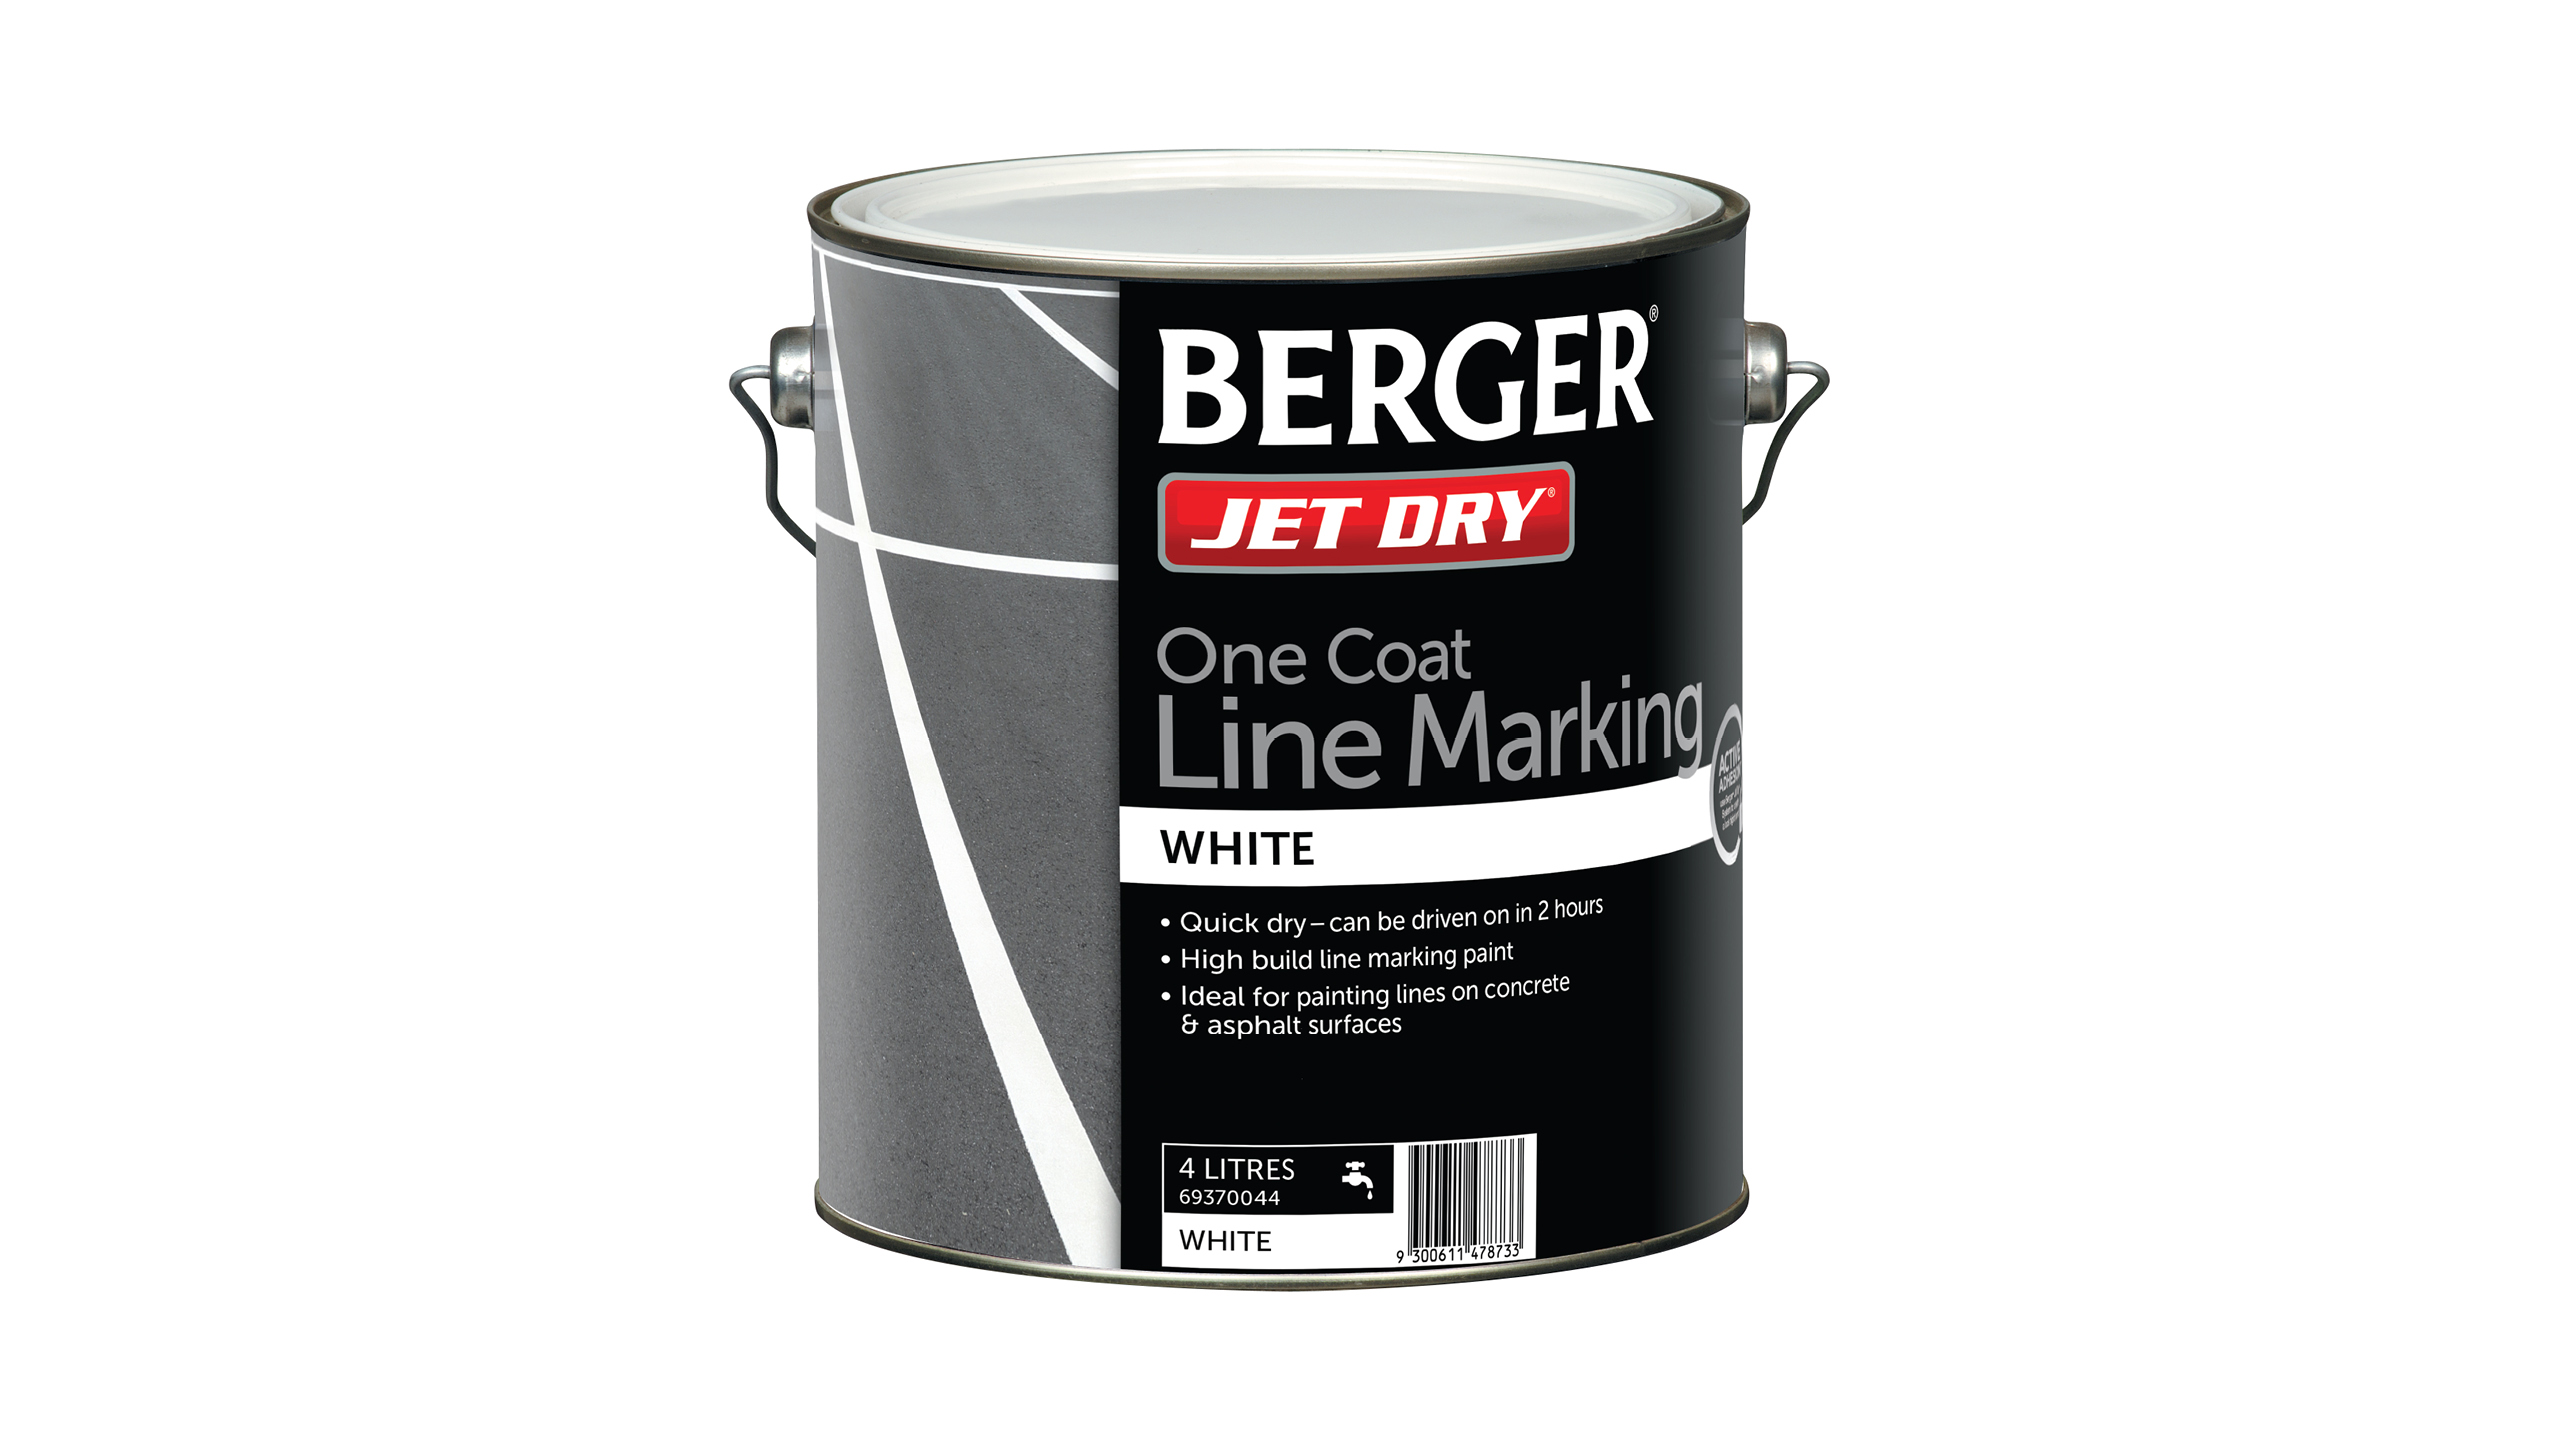 Berger Jet Dry One Coat Line Marking Satin By Dulux Eboss